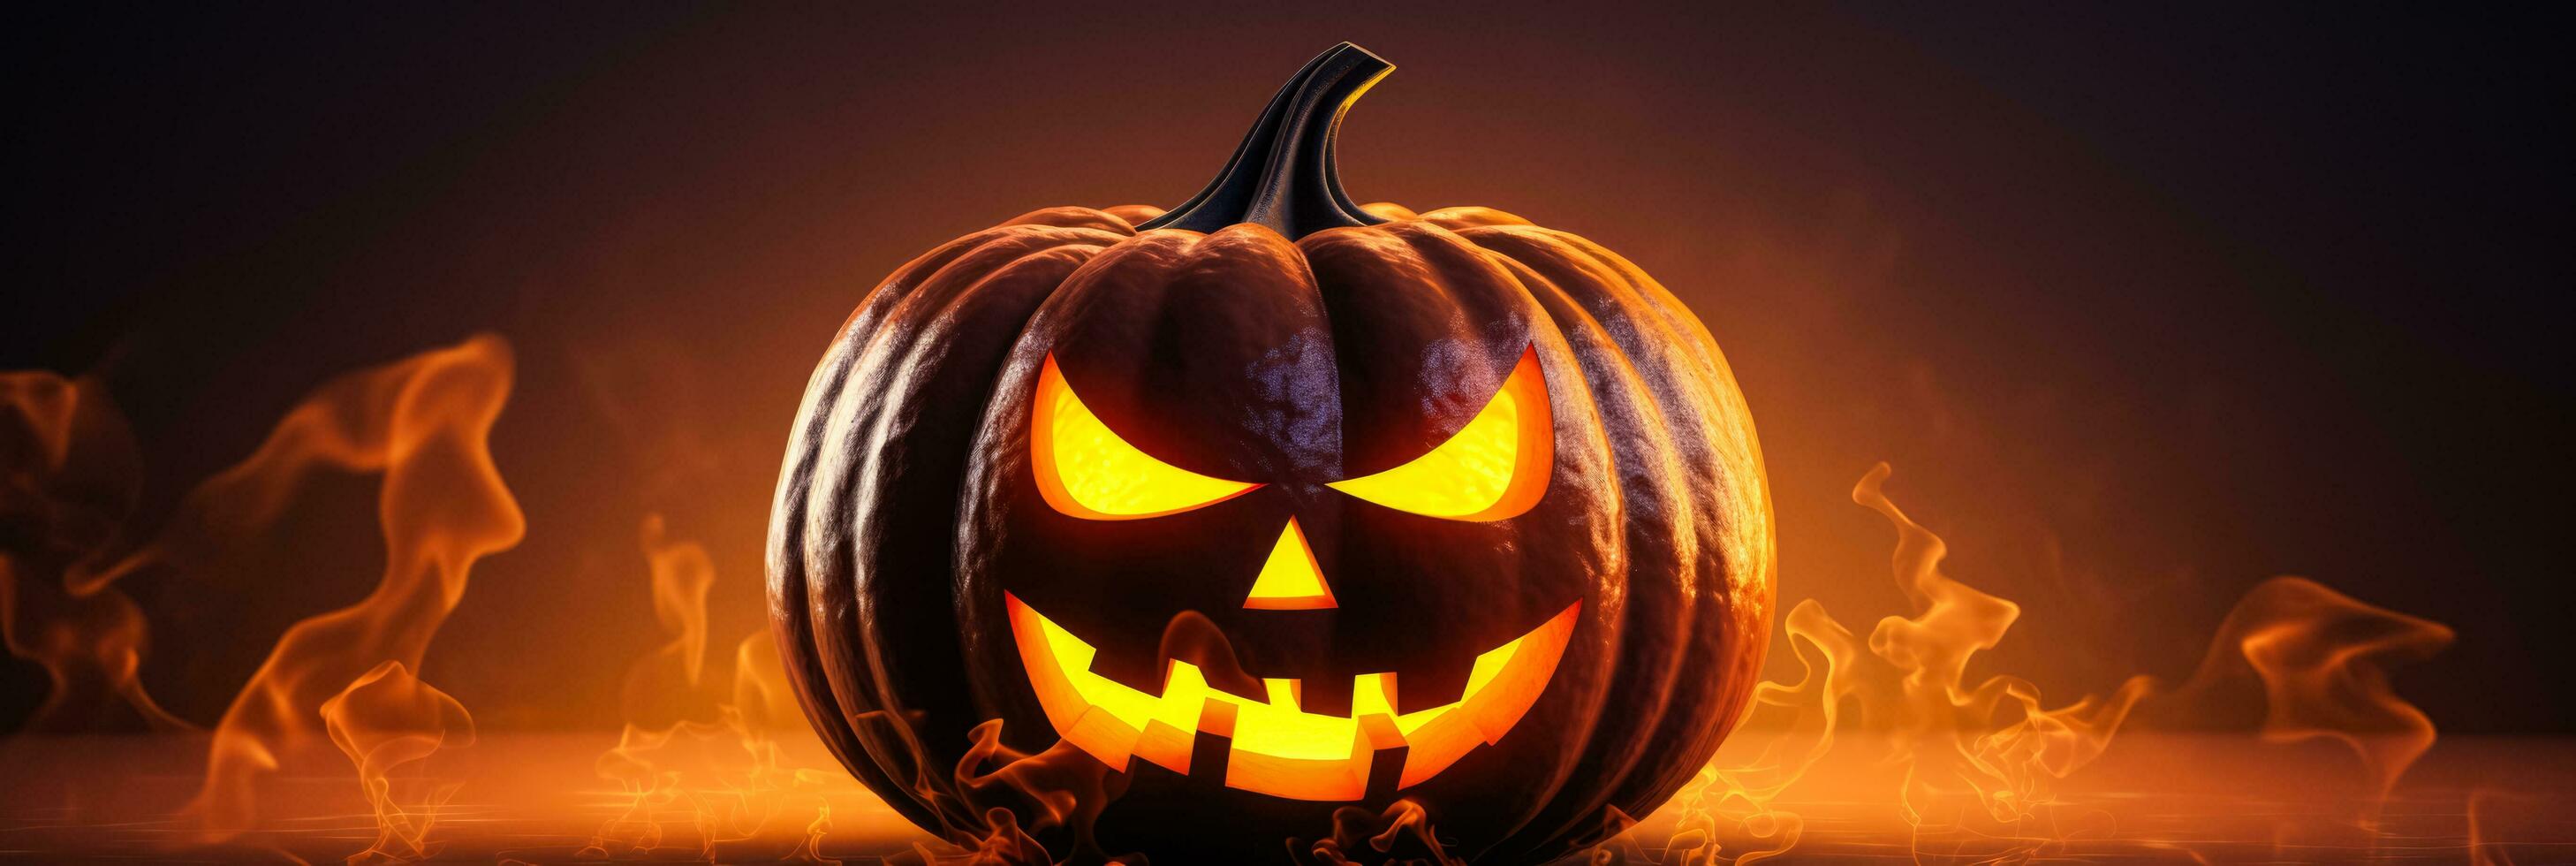 A spooky Halloween pumpkin carving design isolated on a gradient background photo